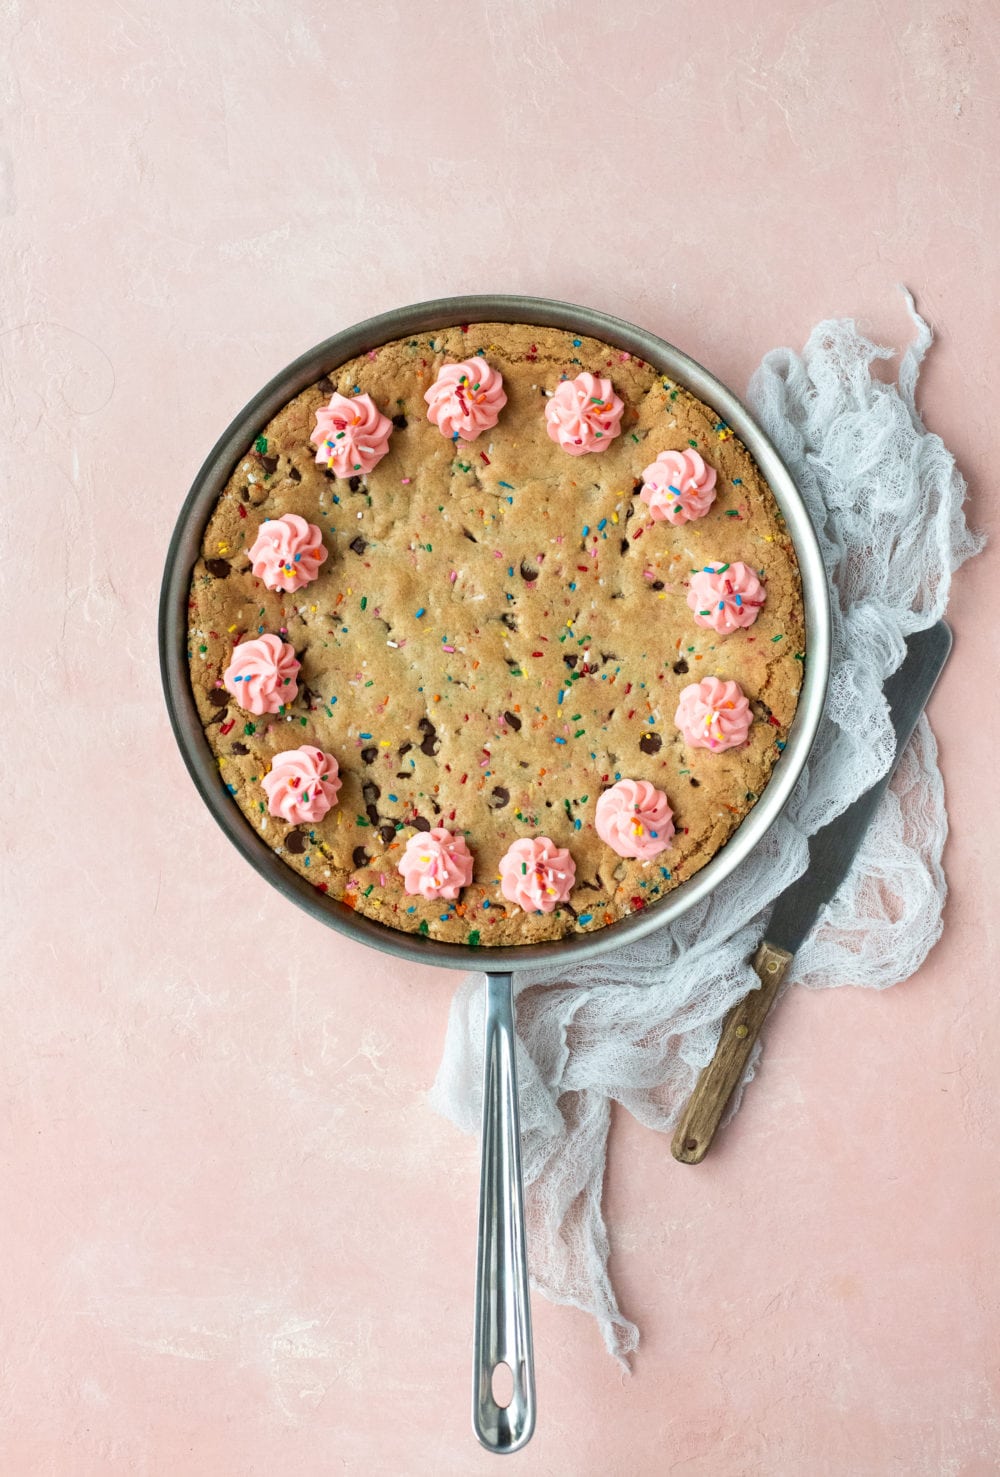 Overhead view of a chocolate chip cookie cake baked in a skillet, with a linen and serving spatula to the side.